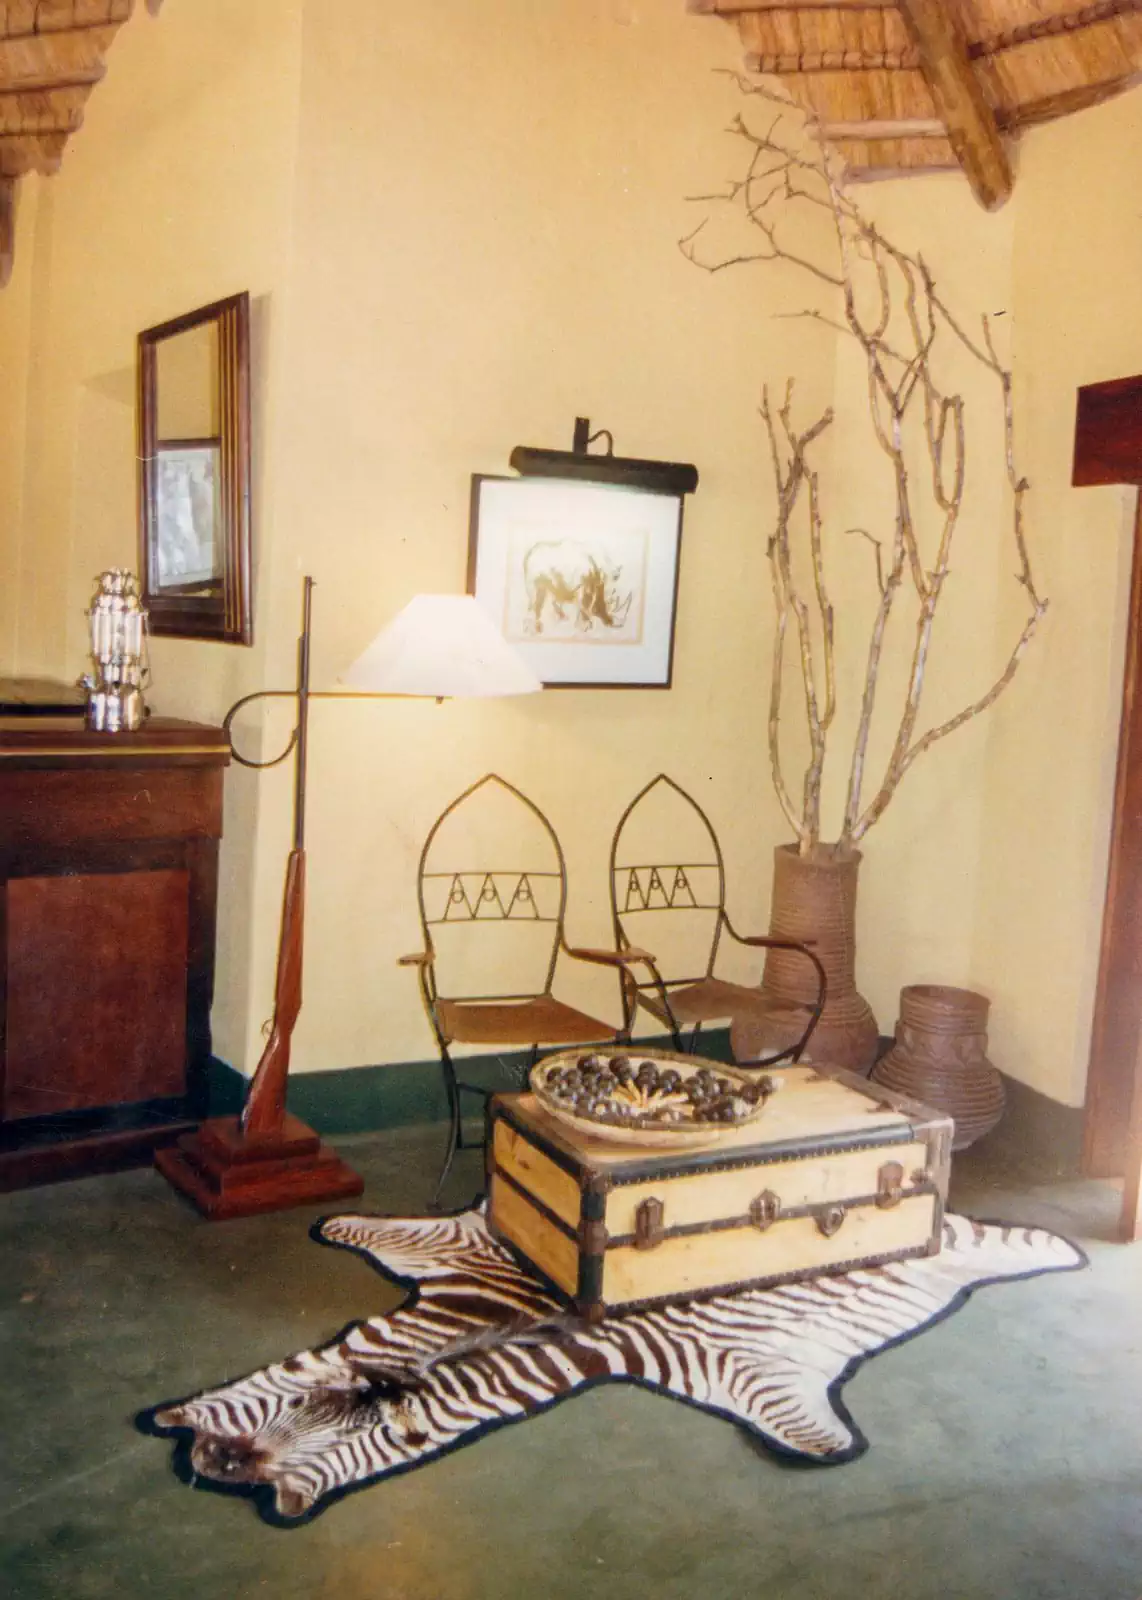 Colonial interior design and vintage furniture in lodge interior by local architect